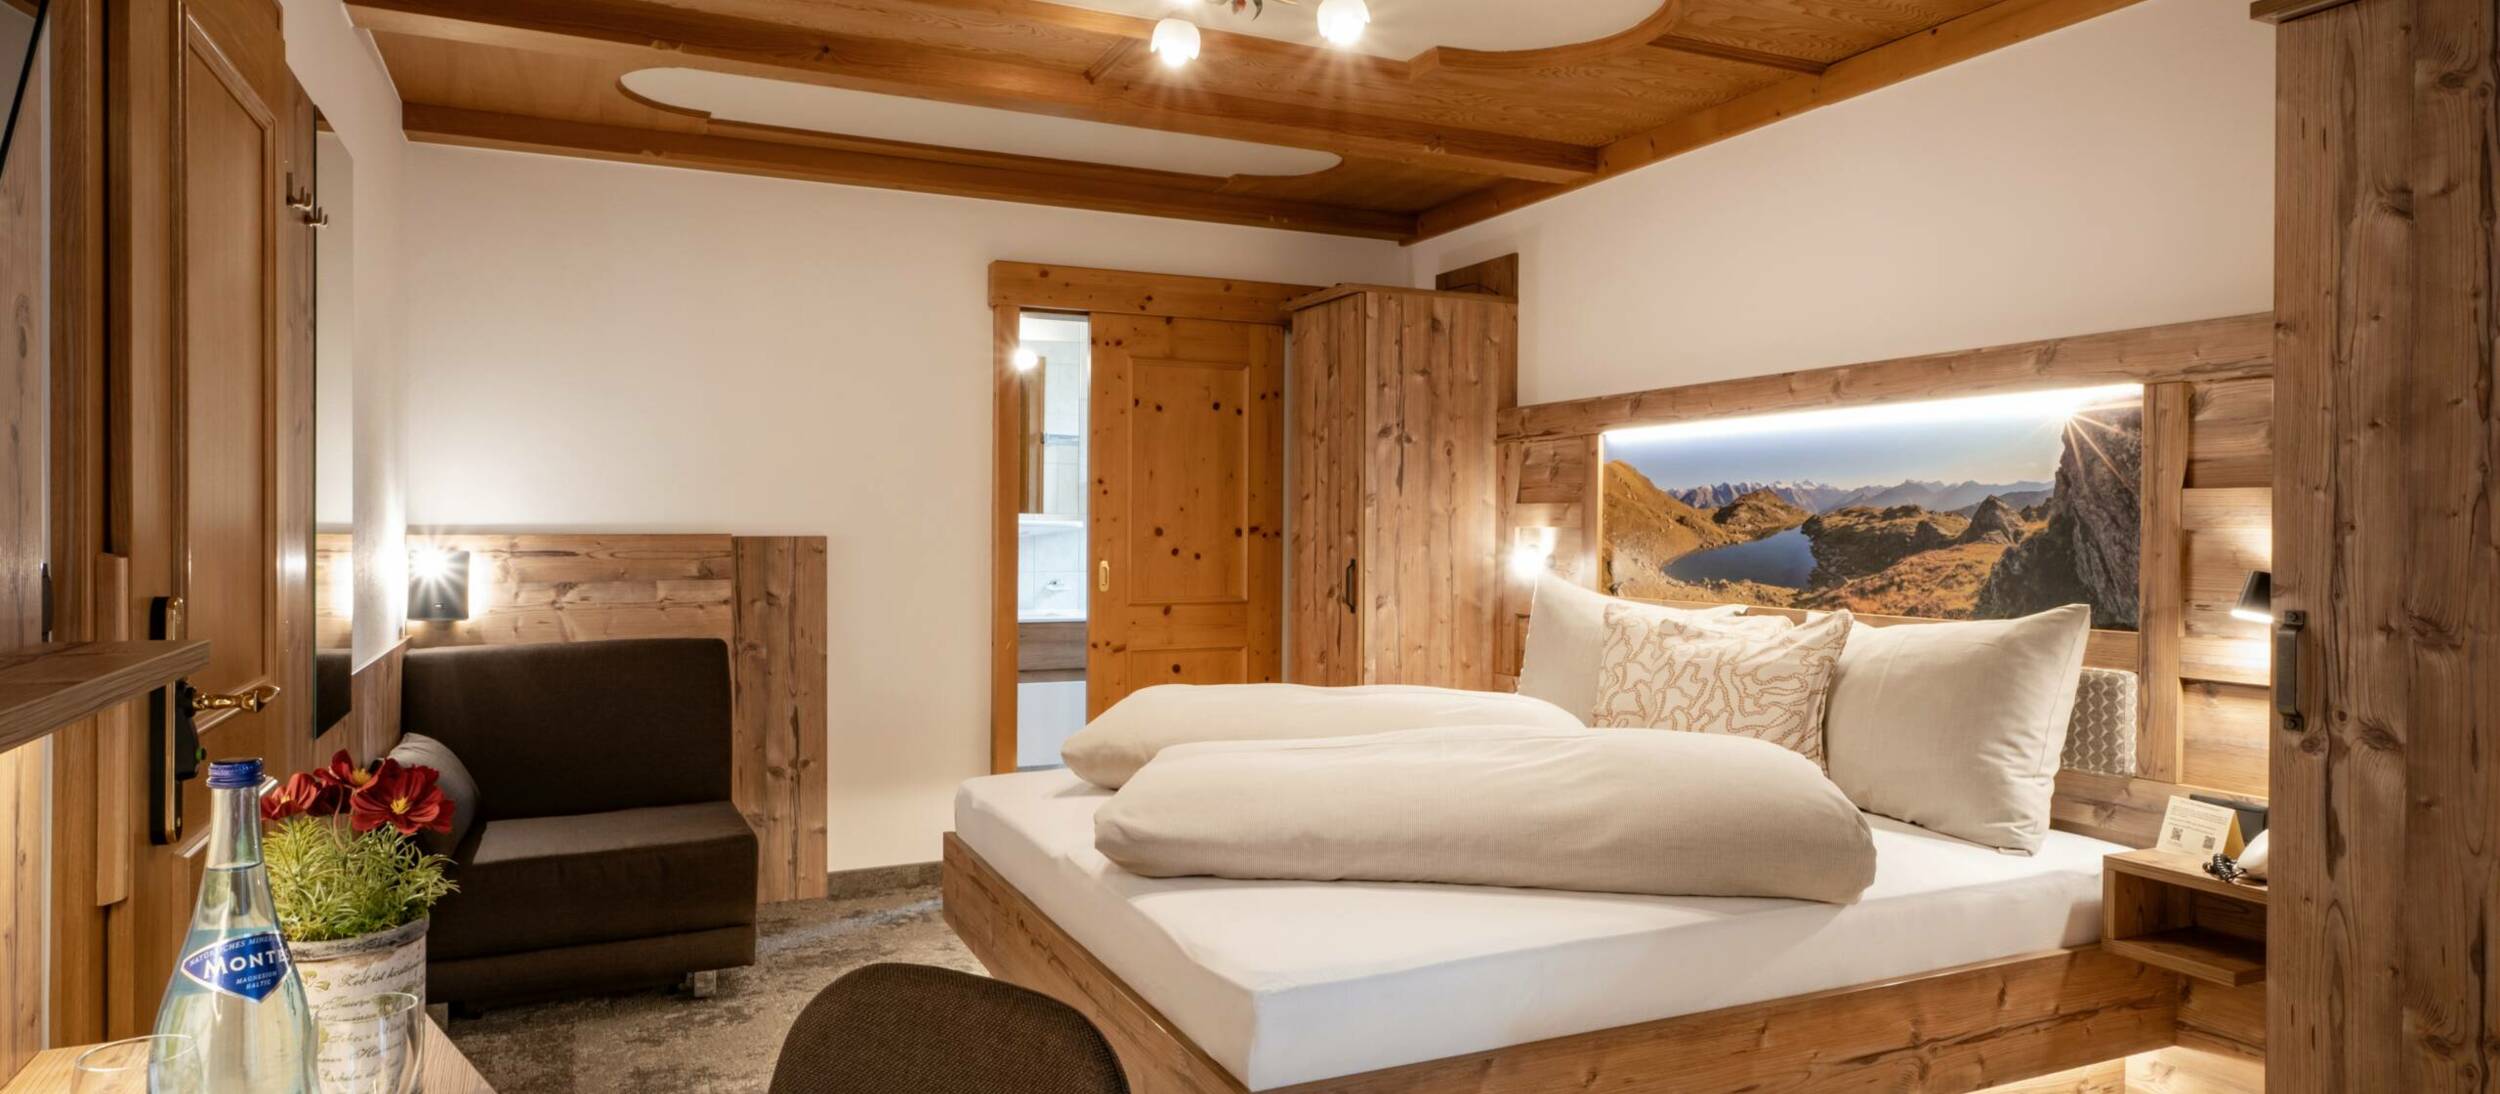 Rooms in Mayrhofen